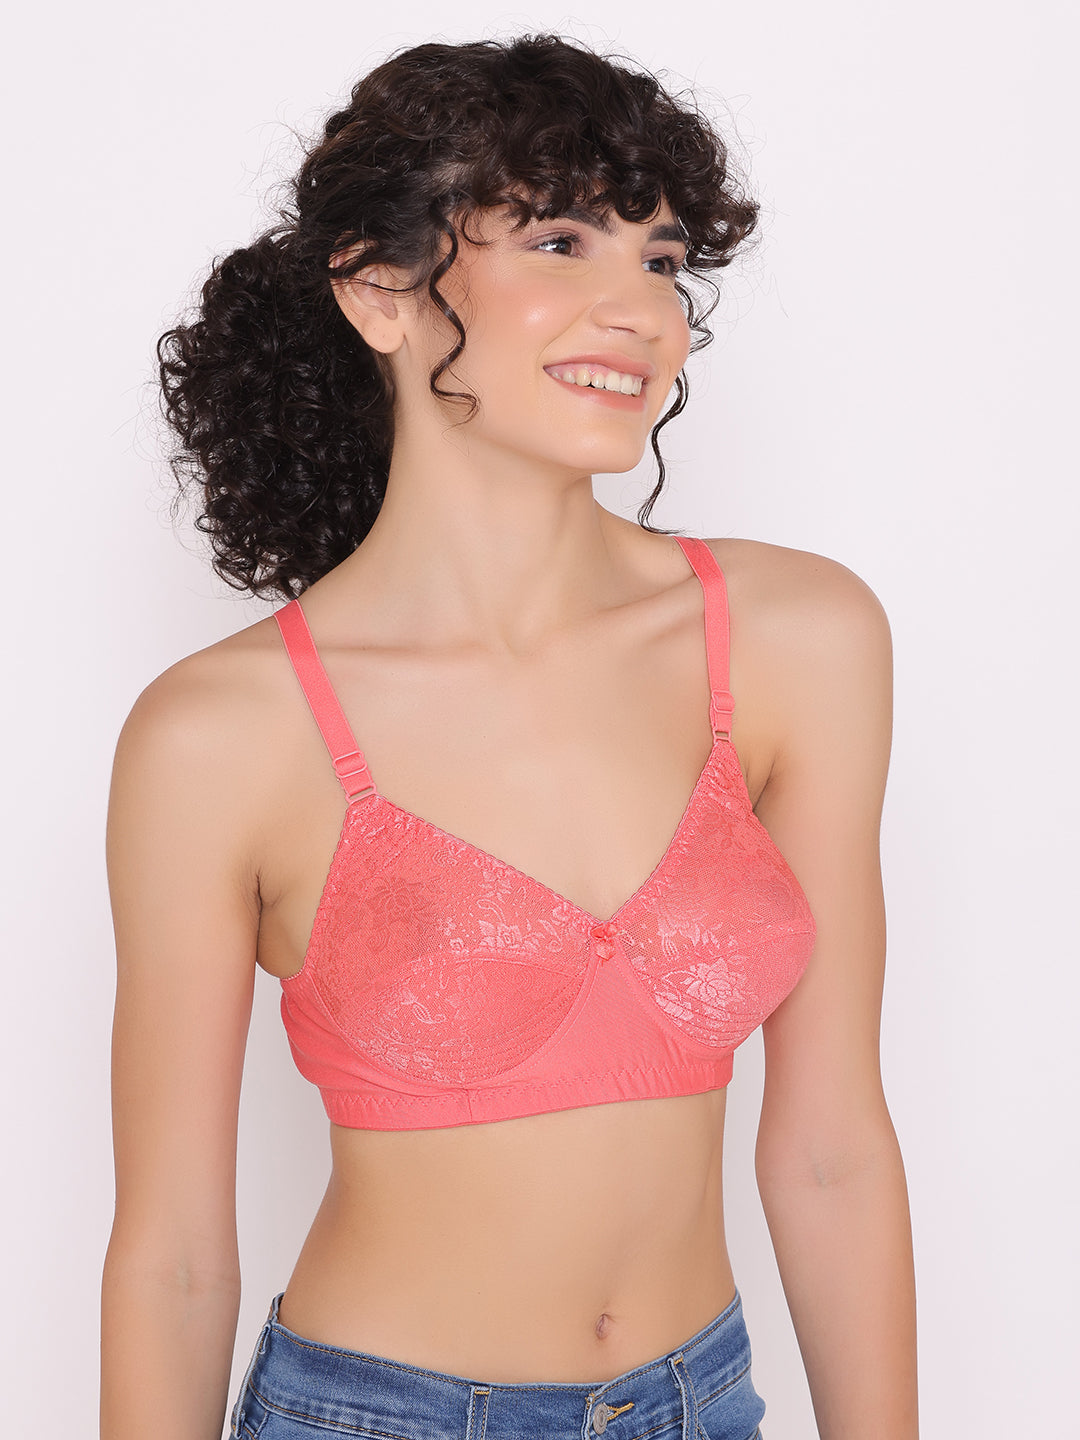 Buy Full Coverage Bras & Full Cup Bras With Fre Delivery - Inkurv